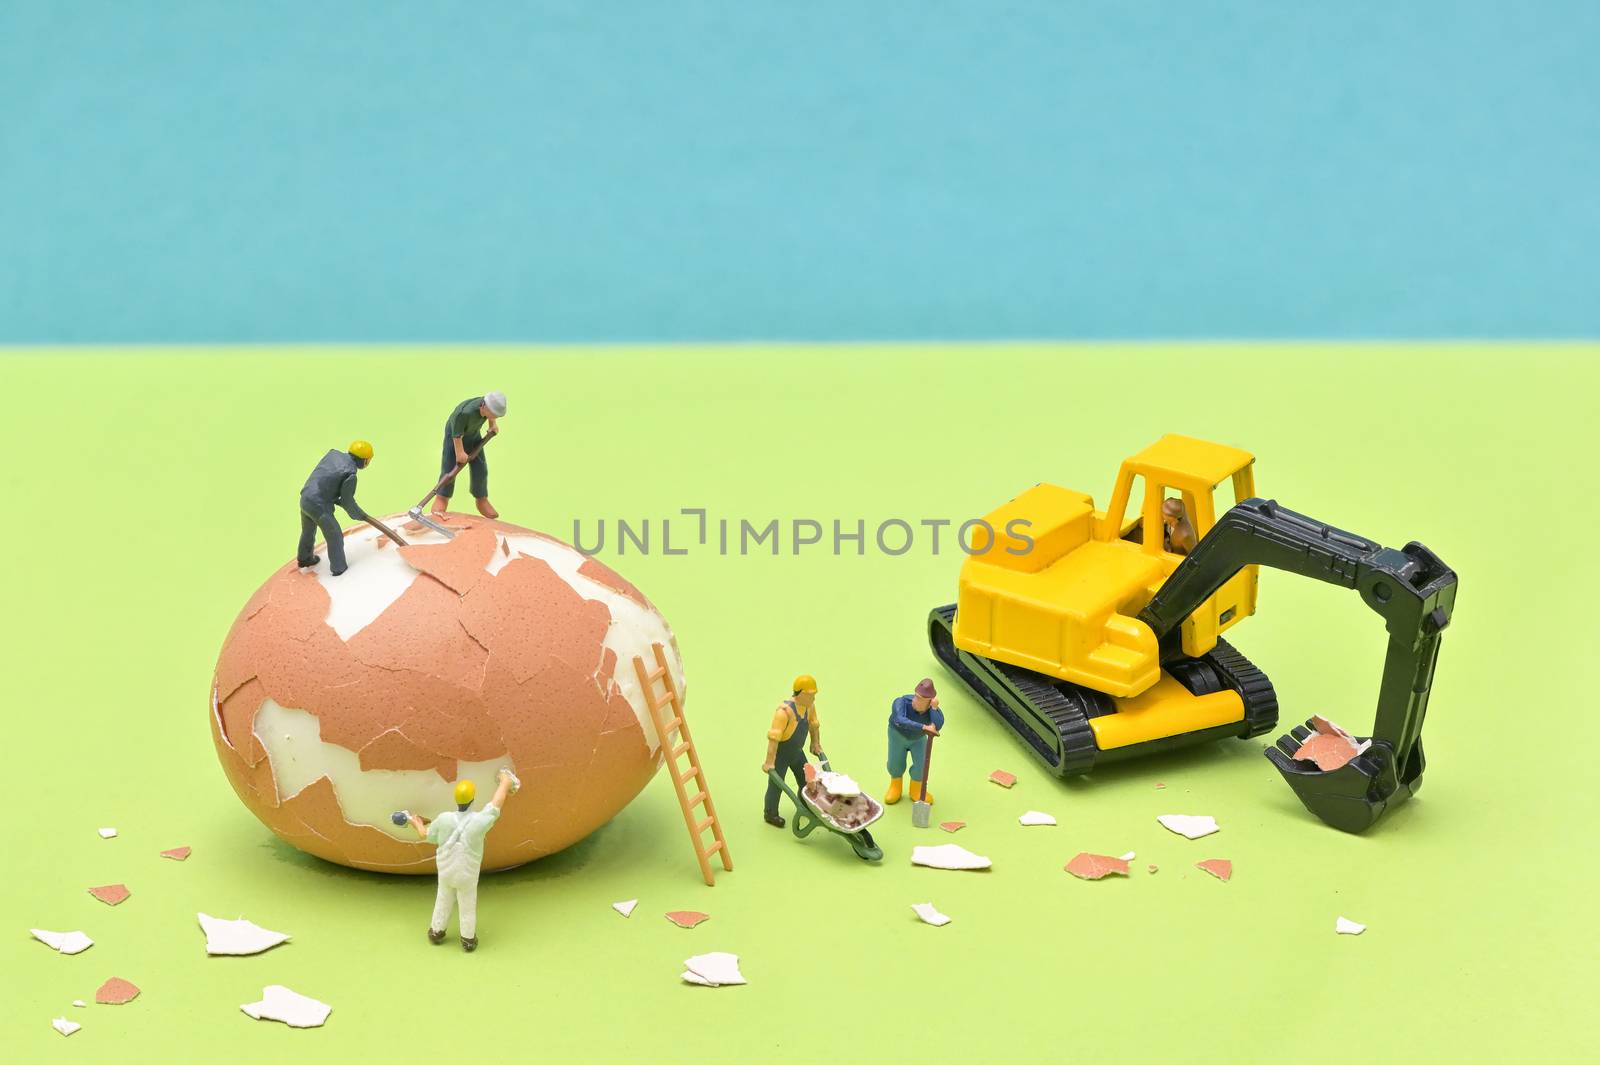 Construction Site with Miniature People Worker and Excavator